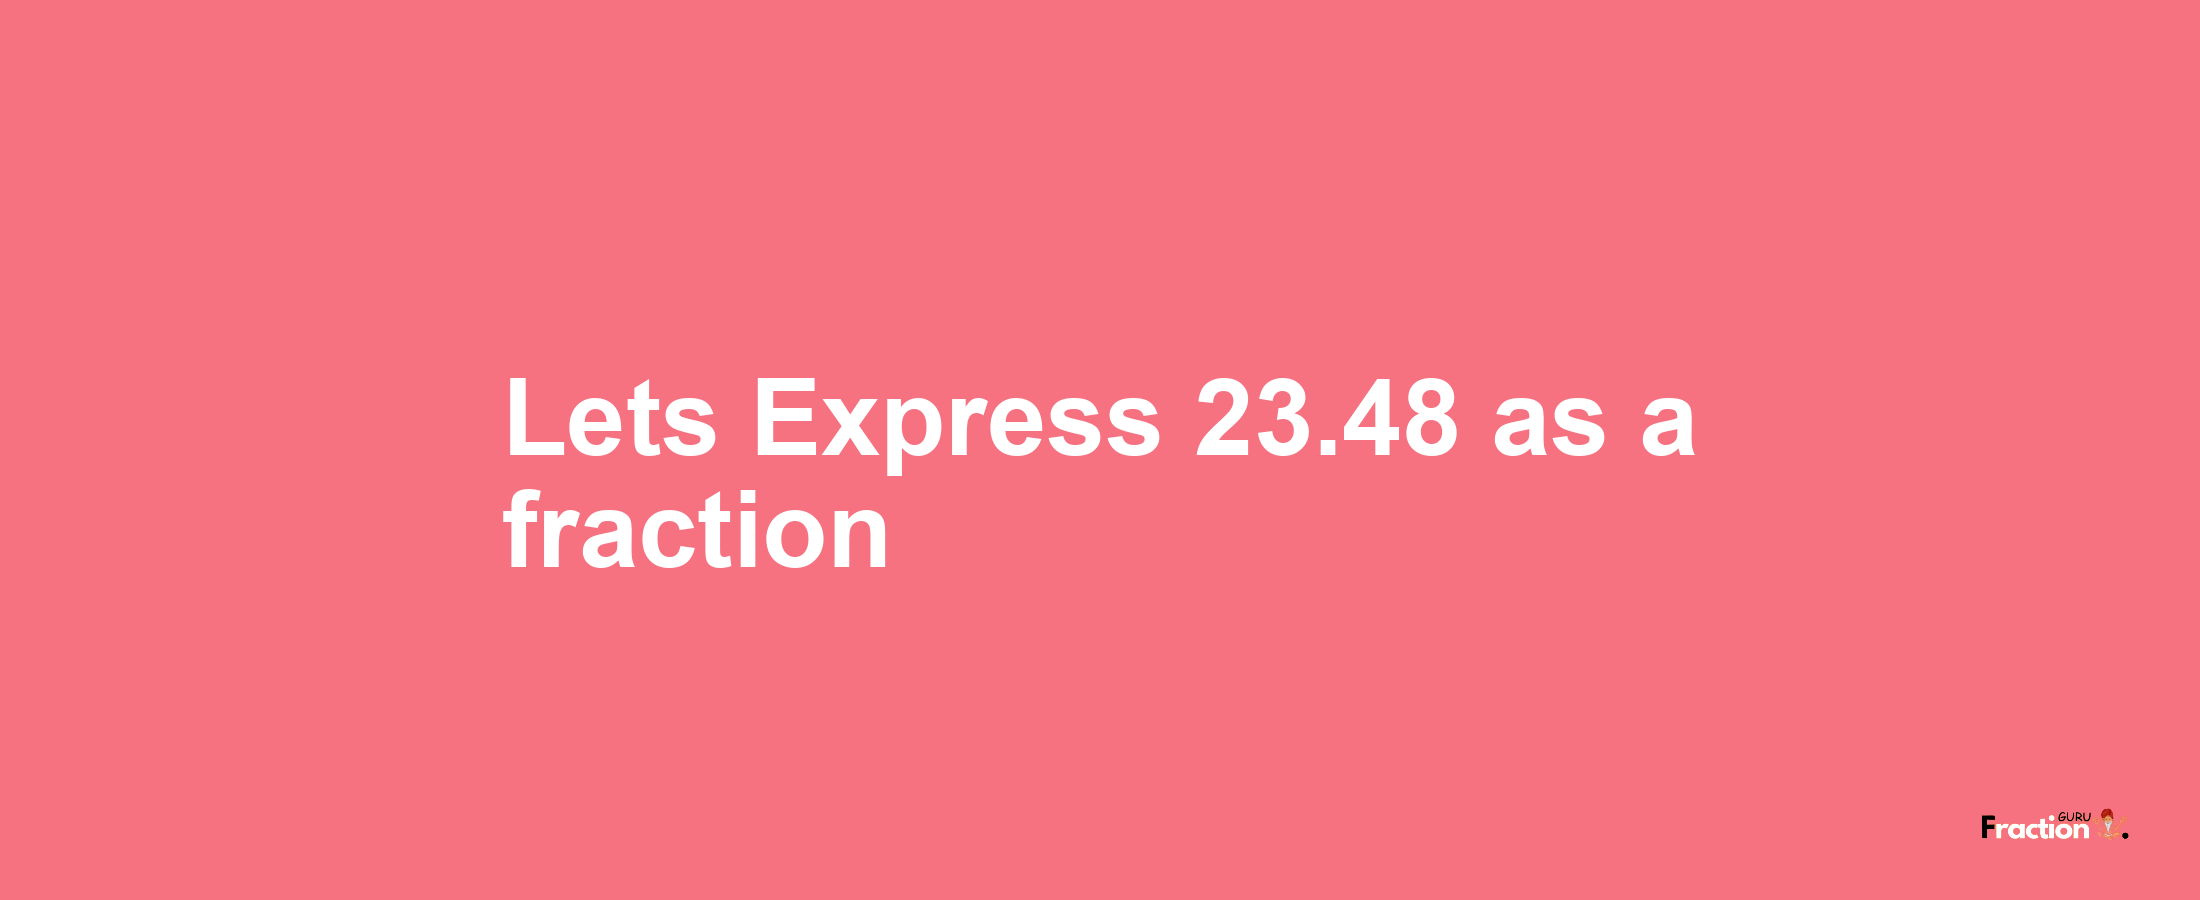 Lets Express 23.48 as afraction